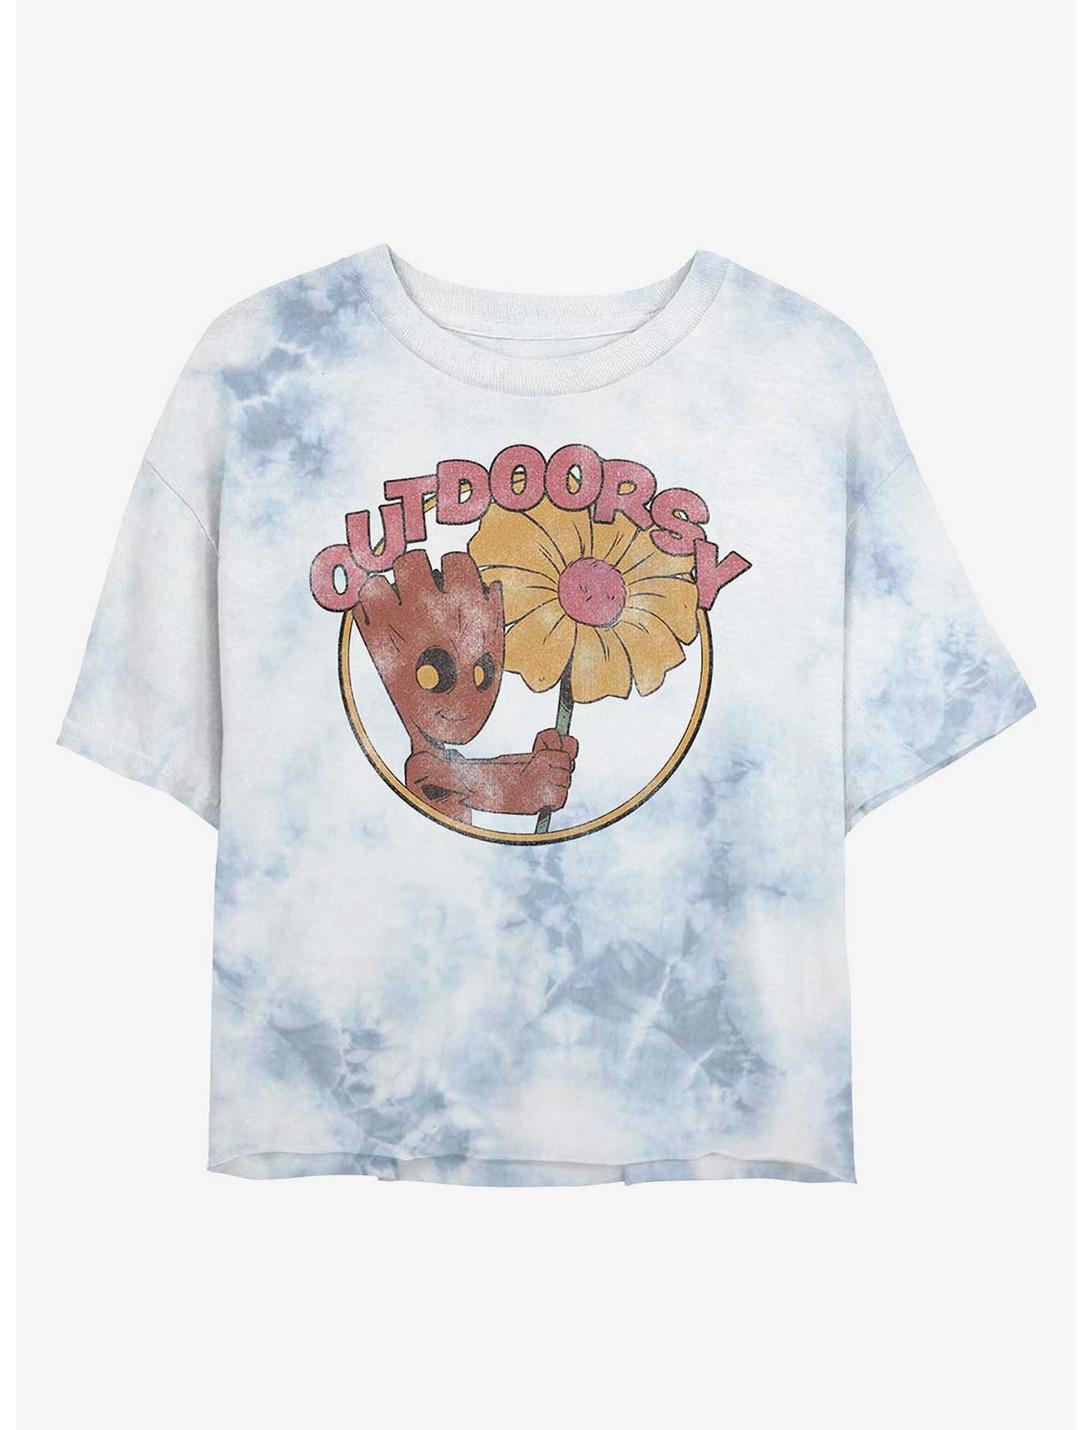 Marvel Guardians of the Galaxy Outdoorsy Groot Tie-Dye Girls Crop T-Shirt, WHITEBLUE, hi-res